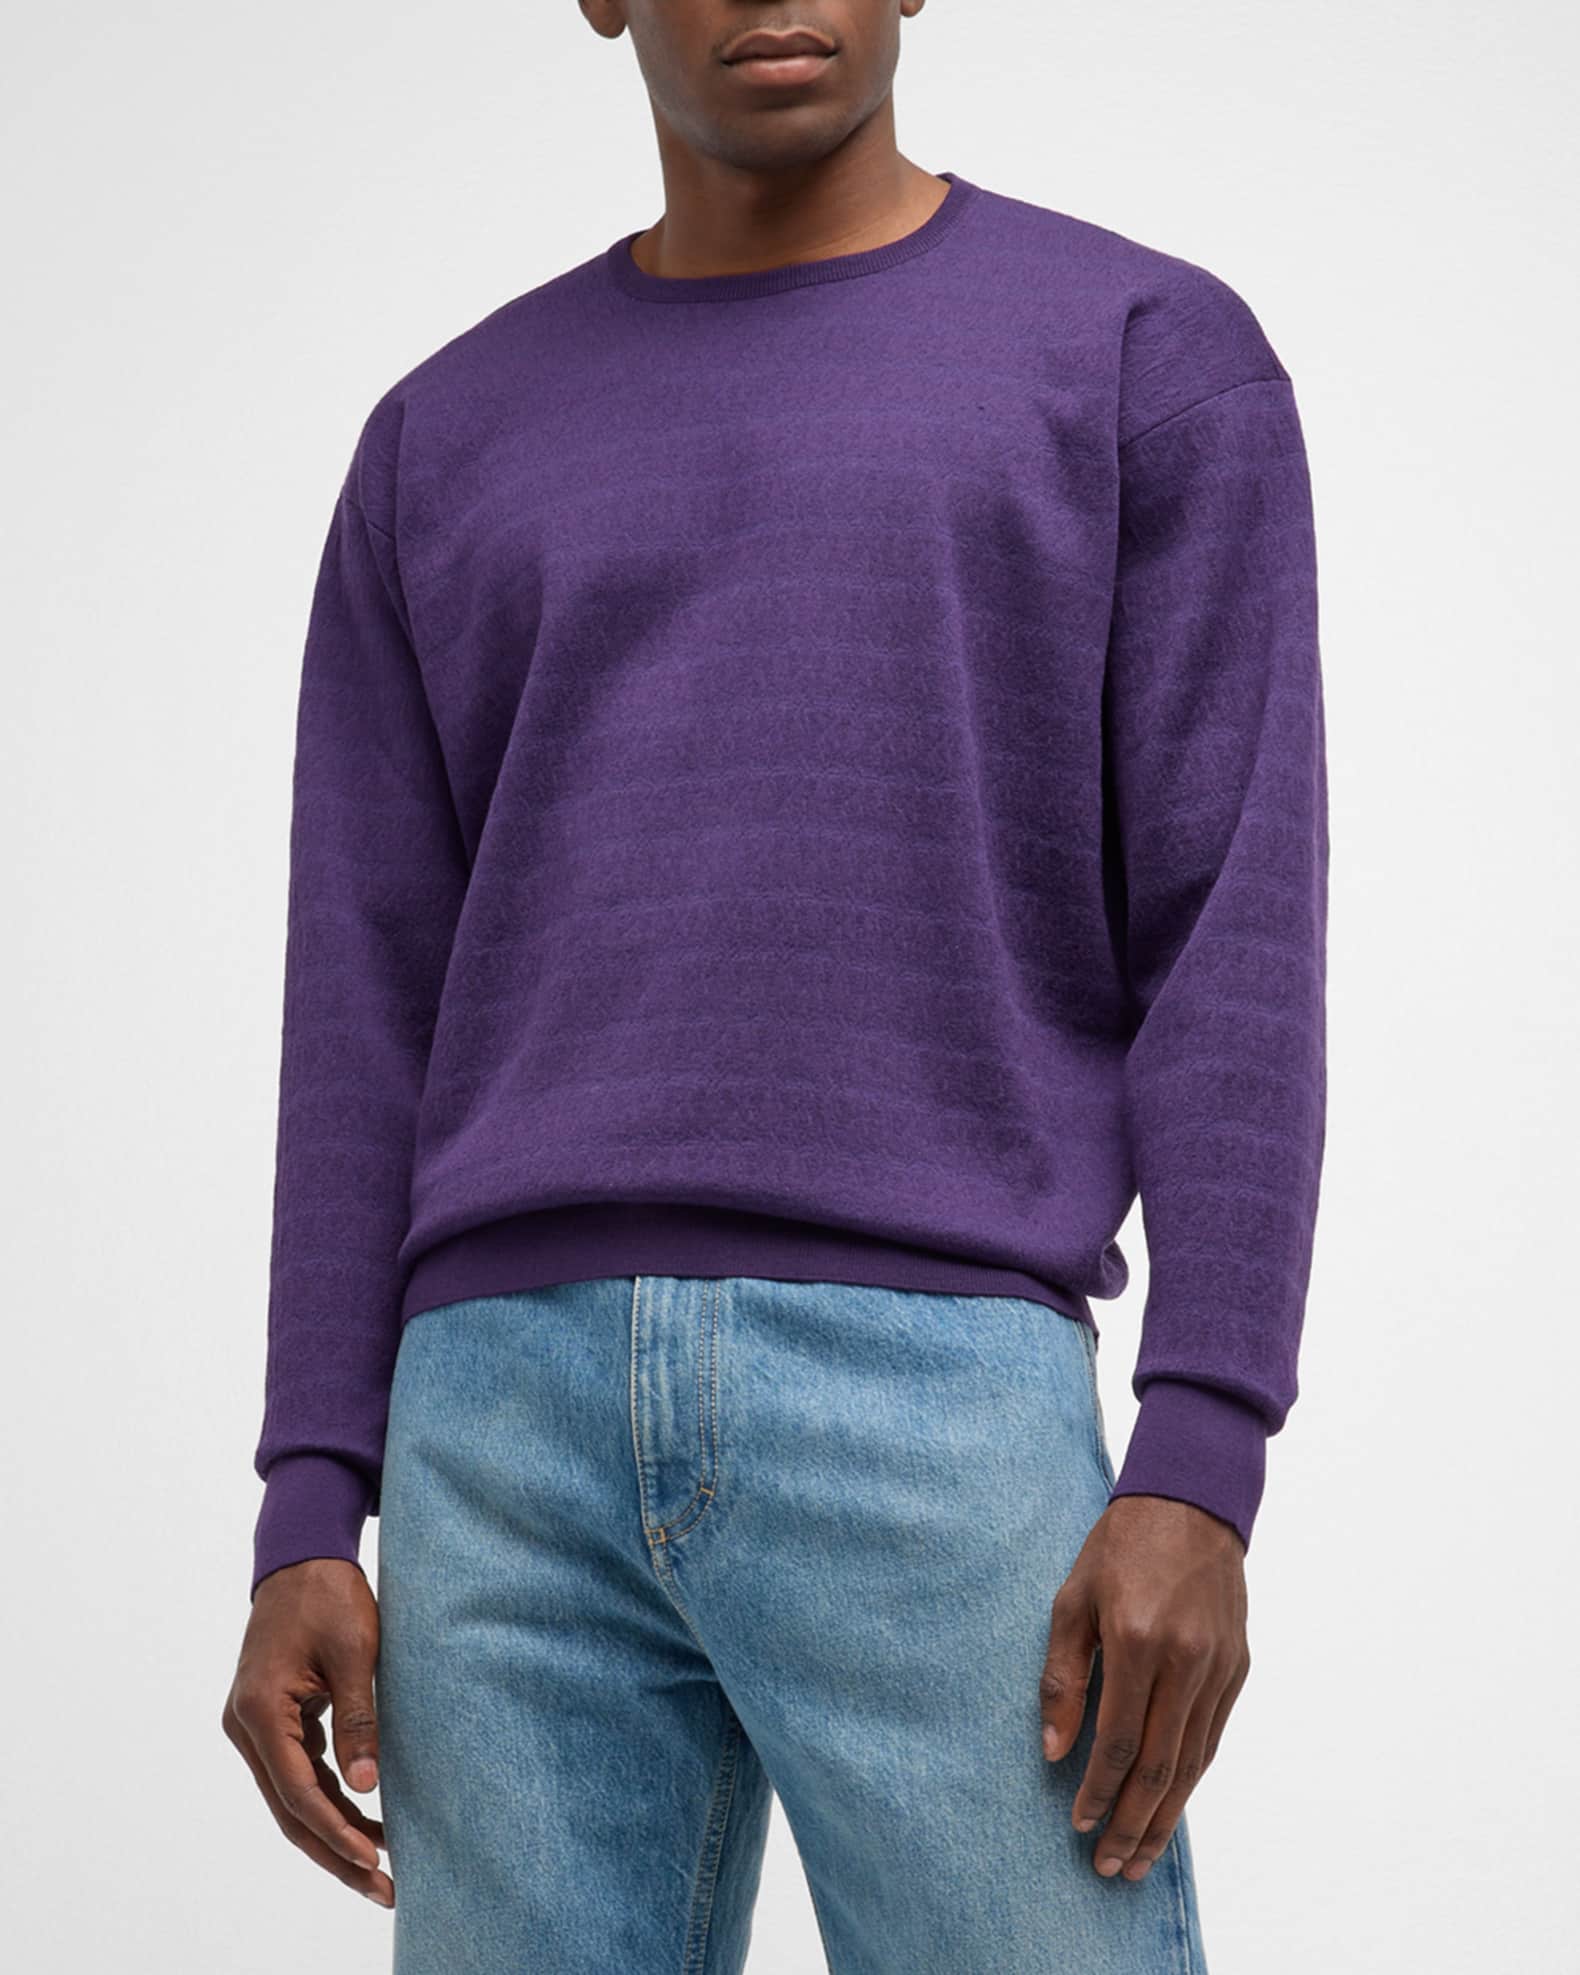 Louis Vuitton Purple and Black Fine Knit Long Sleeve Jumper with